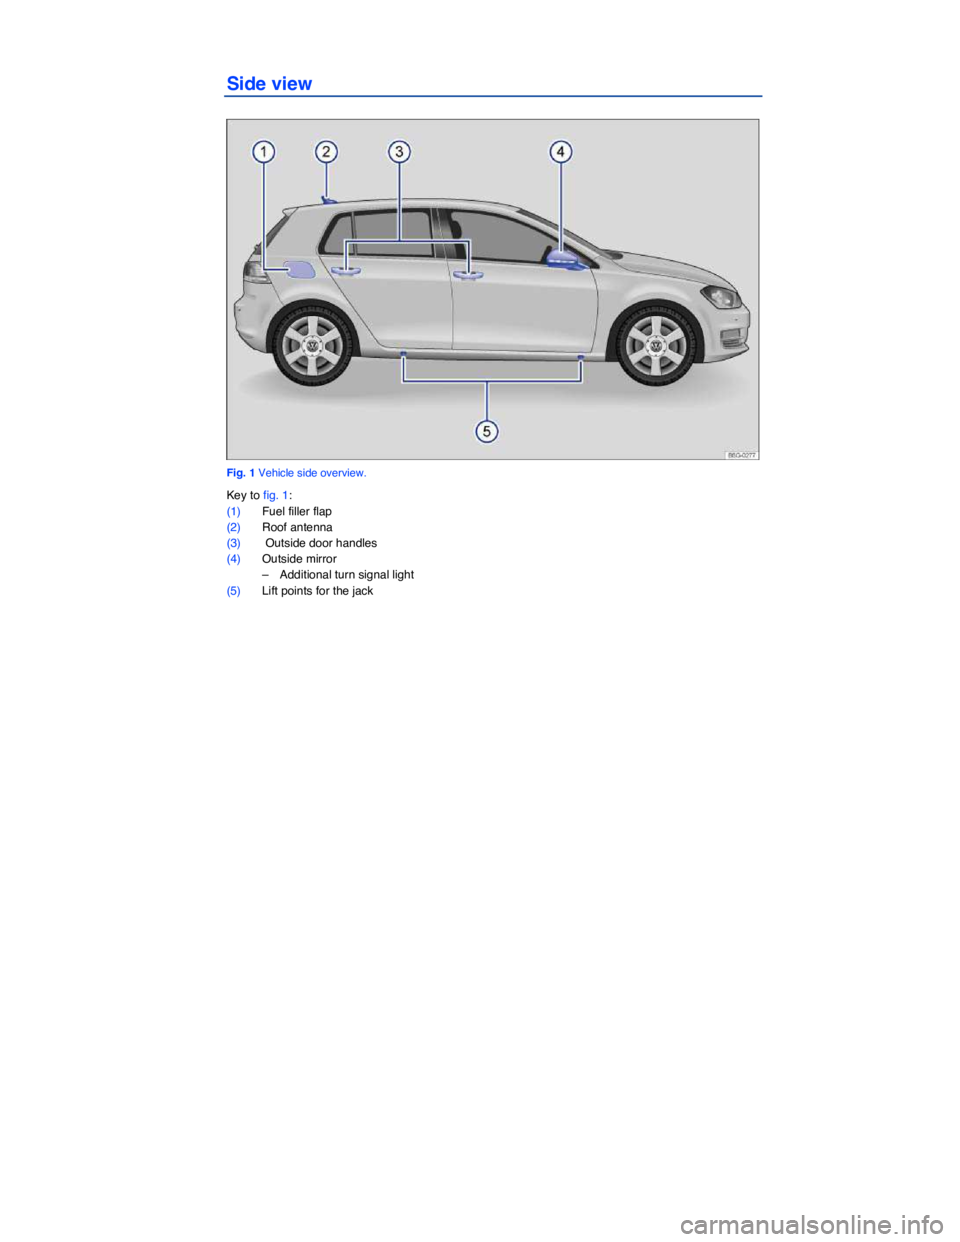 VOLKSWAGEN GOLF 2015  Owner´s Manual   
Side view 
 
Fig. 1 Vehicle side overview. 
Key to fig. 1: 
(1) Fuel filler flap 
(2) Roof antenna  
(3)  Outside door handles  
(4) Outside mirror  
–  Additional turn signal light  
(5) Lift po